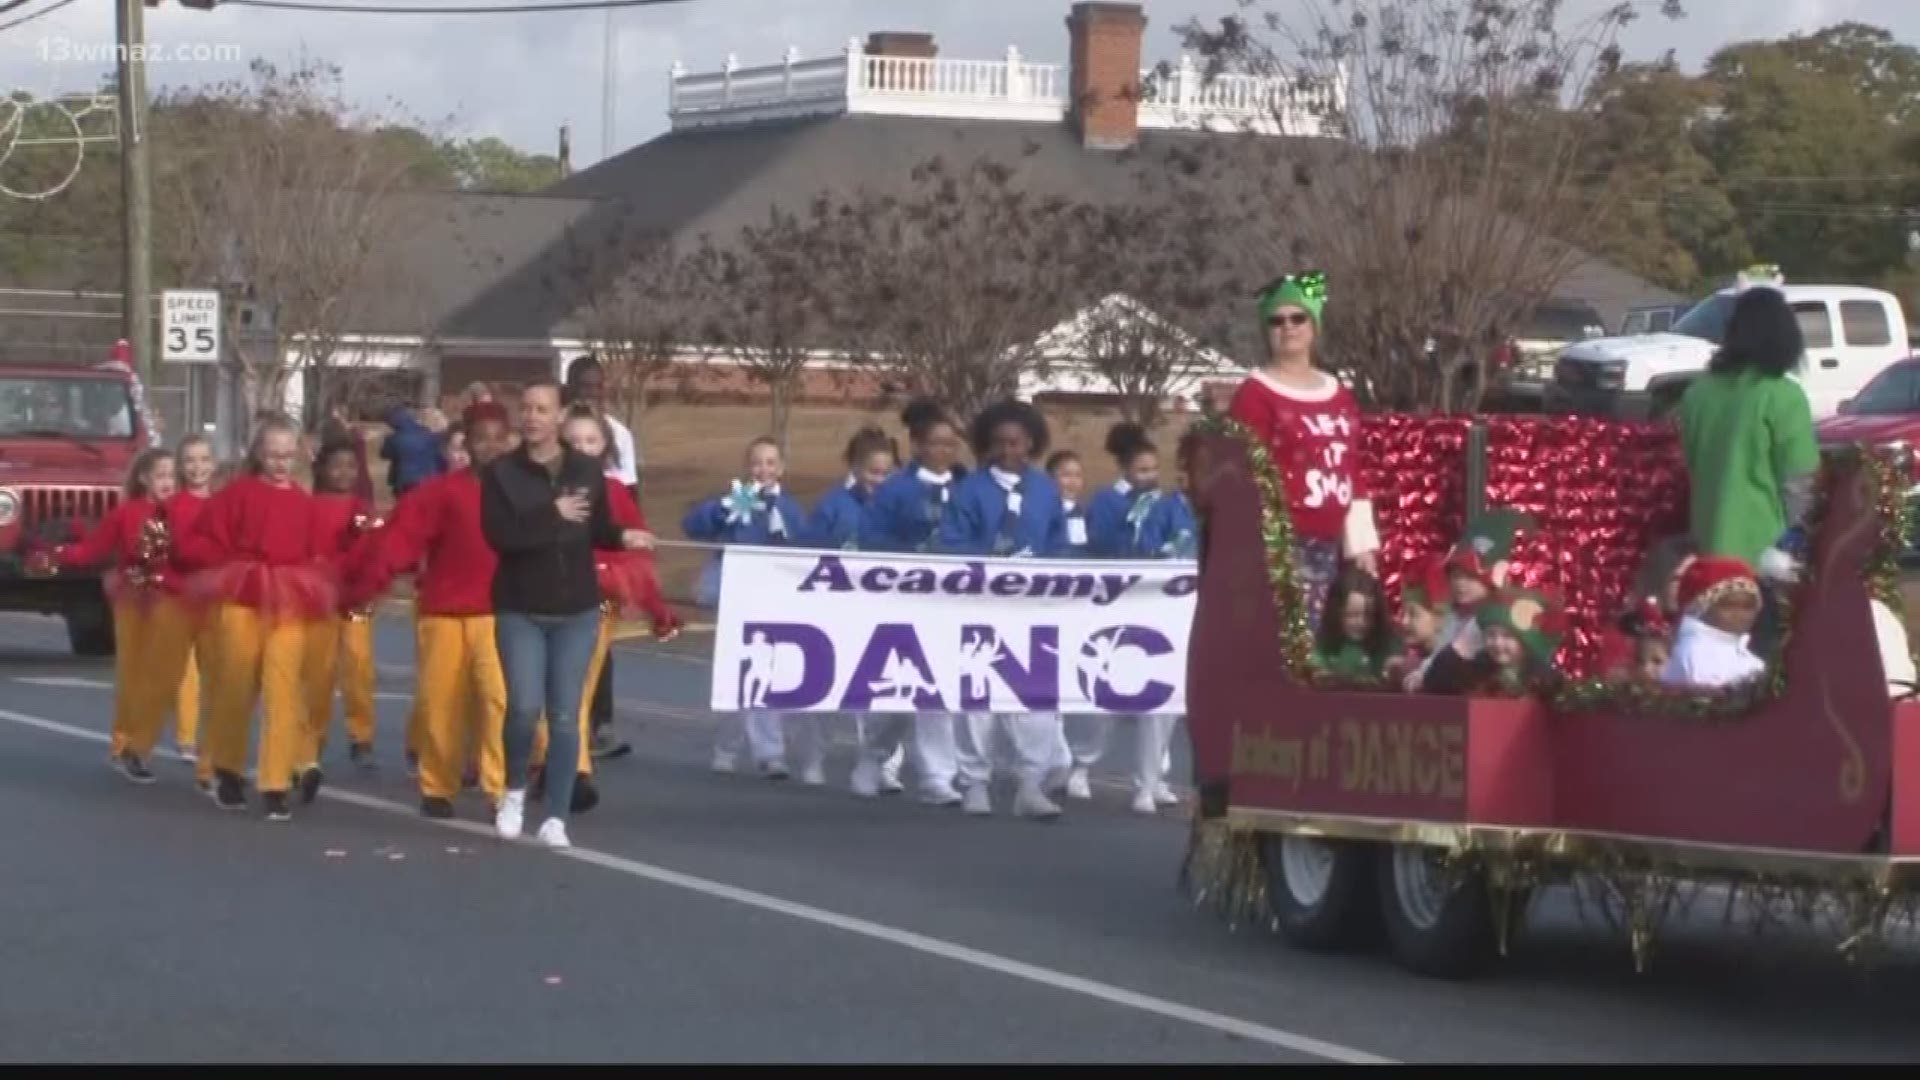 Perry Parade brings Christmas cheer to all